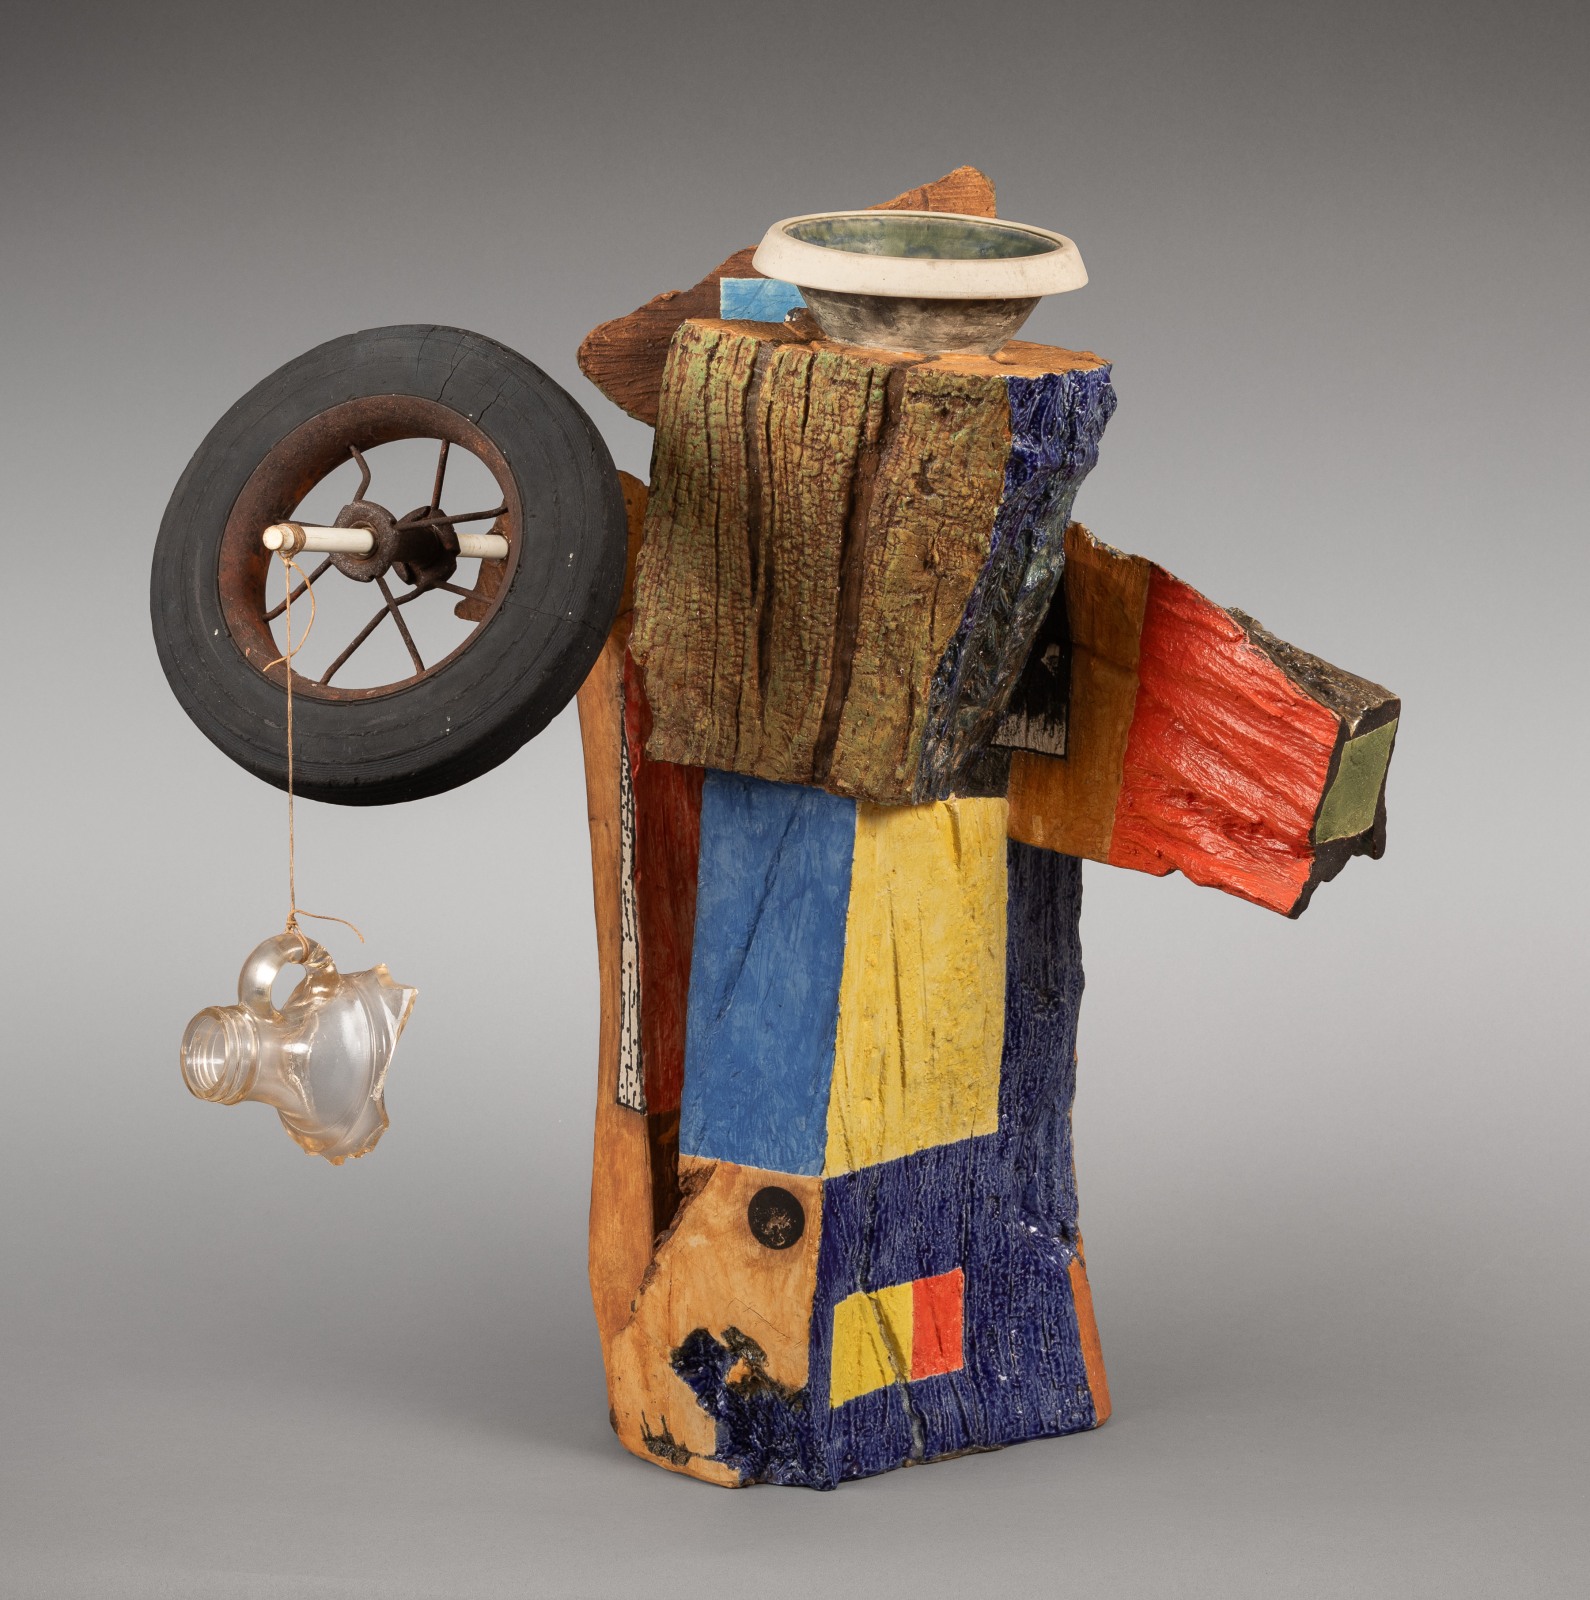 Robert Hudson: Ceramic Sculpture and Drawings 1970-2022 - Opening Reception: Saturday, April 20th, 3 to 5 pm, Remarks at 3:30 pm - Exhibitions - Paul Thiebaud Gallery